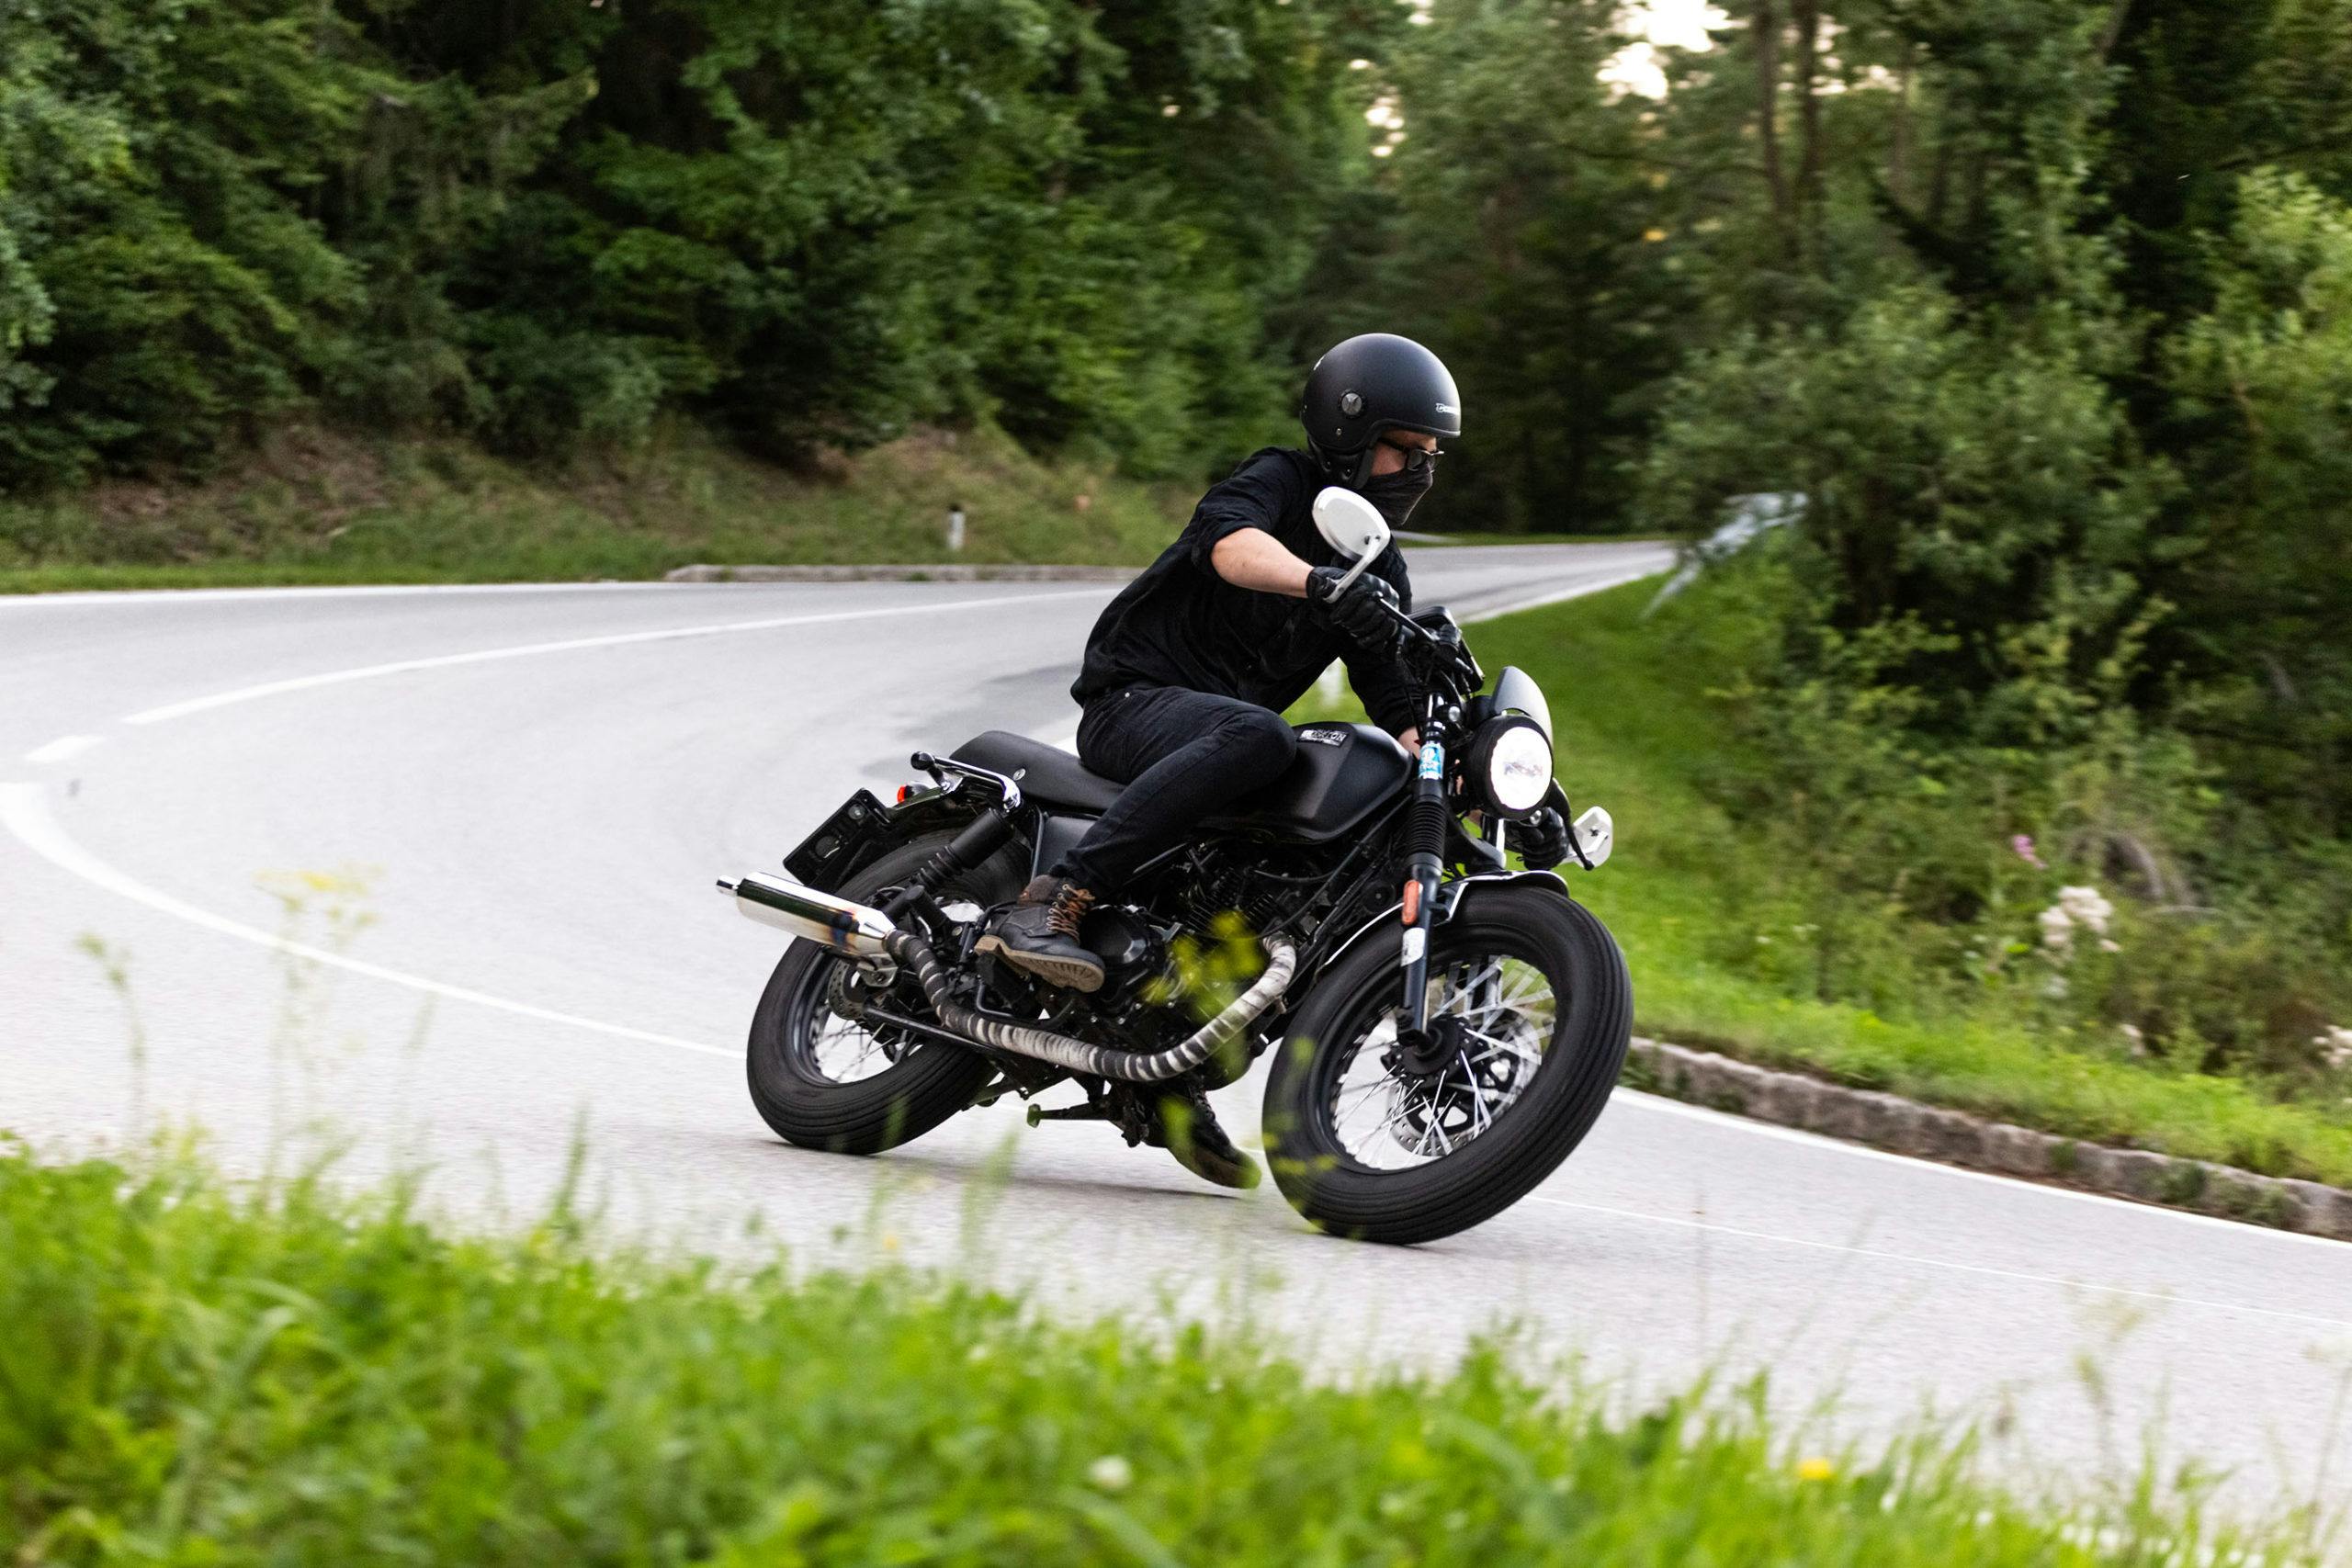 Rider of the Month: Robert on his Cromwell 125 riding down a winding mountain road